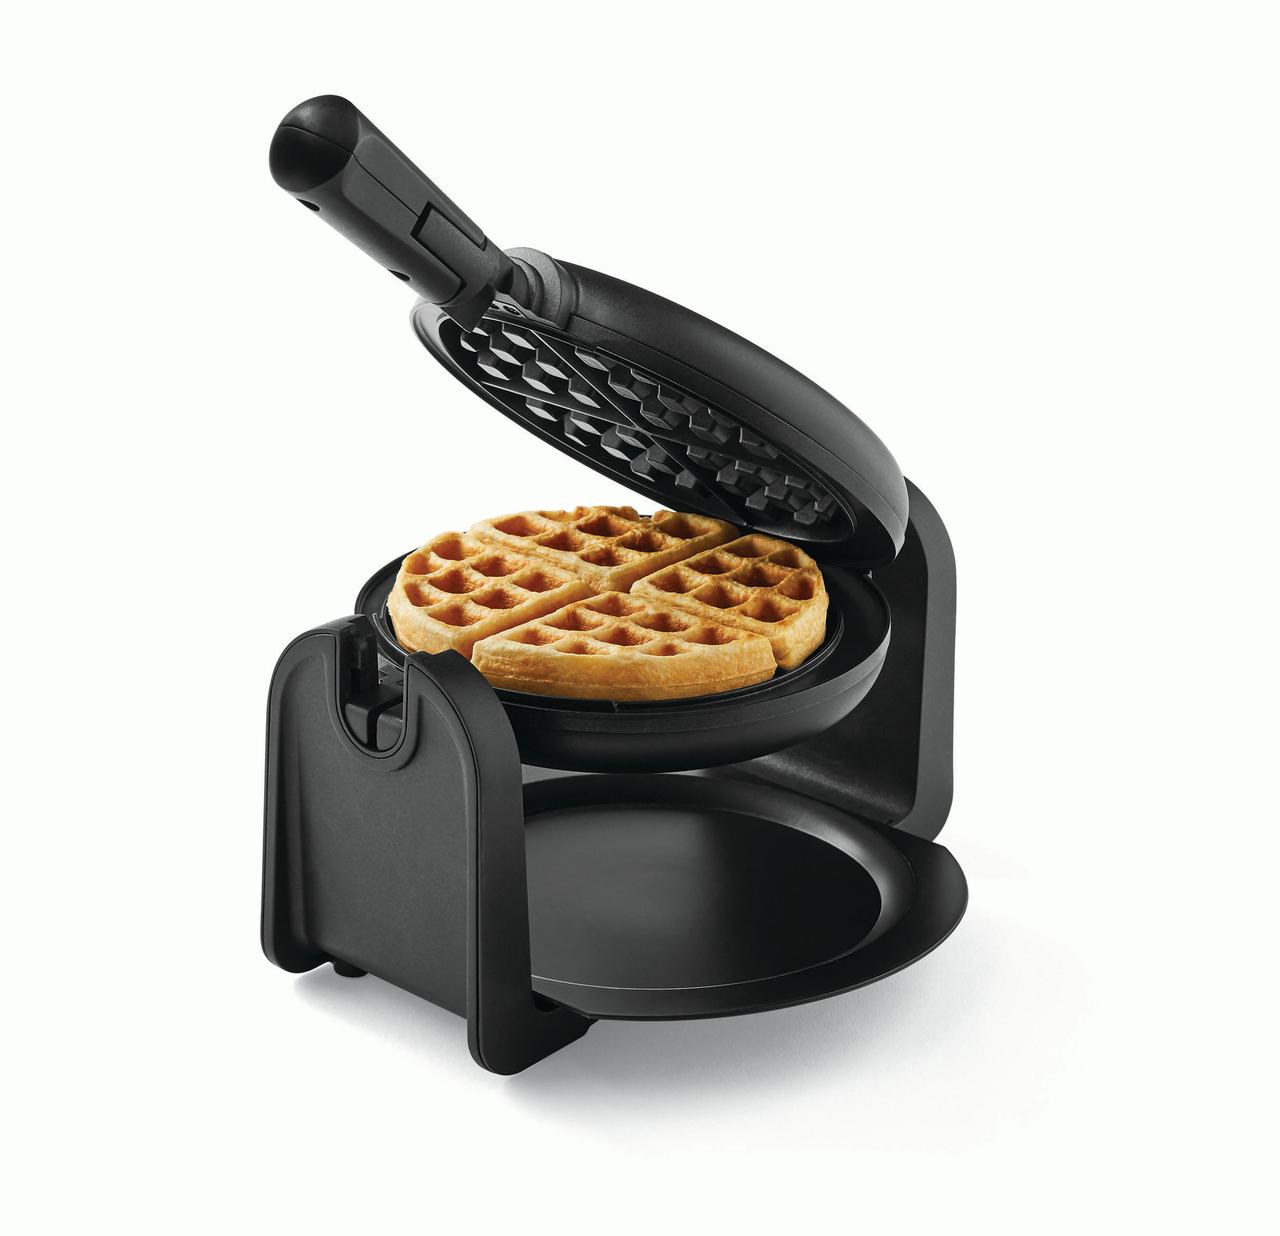 Farberware Single-Flip Waffle Maker, Black with Stainless Steel Decoration - image 4 of 6